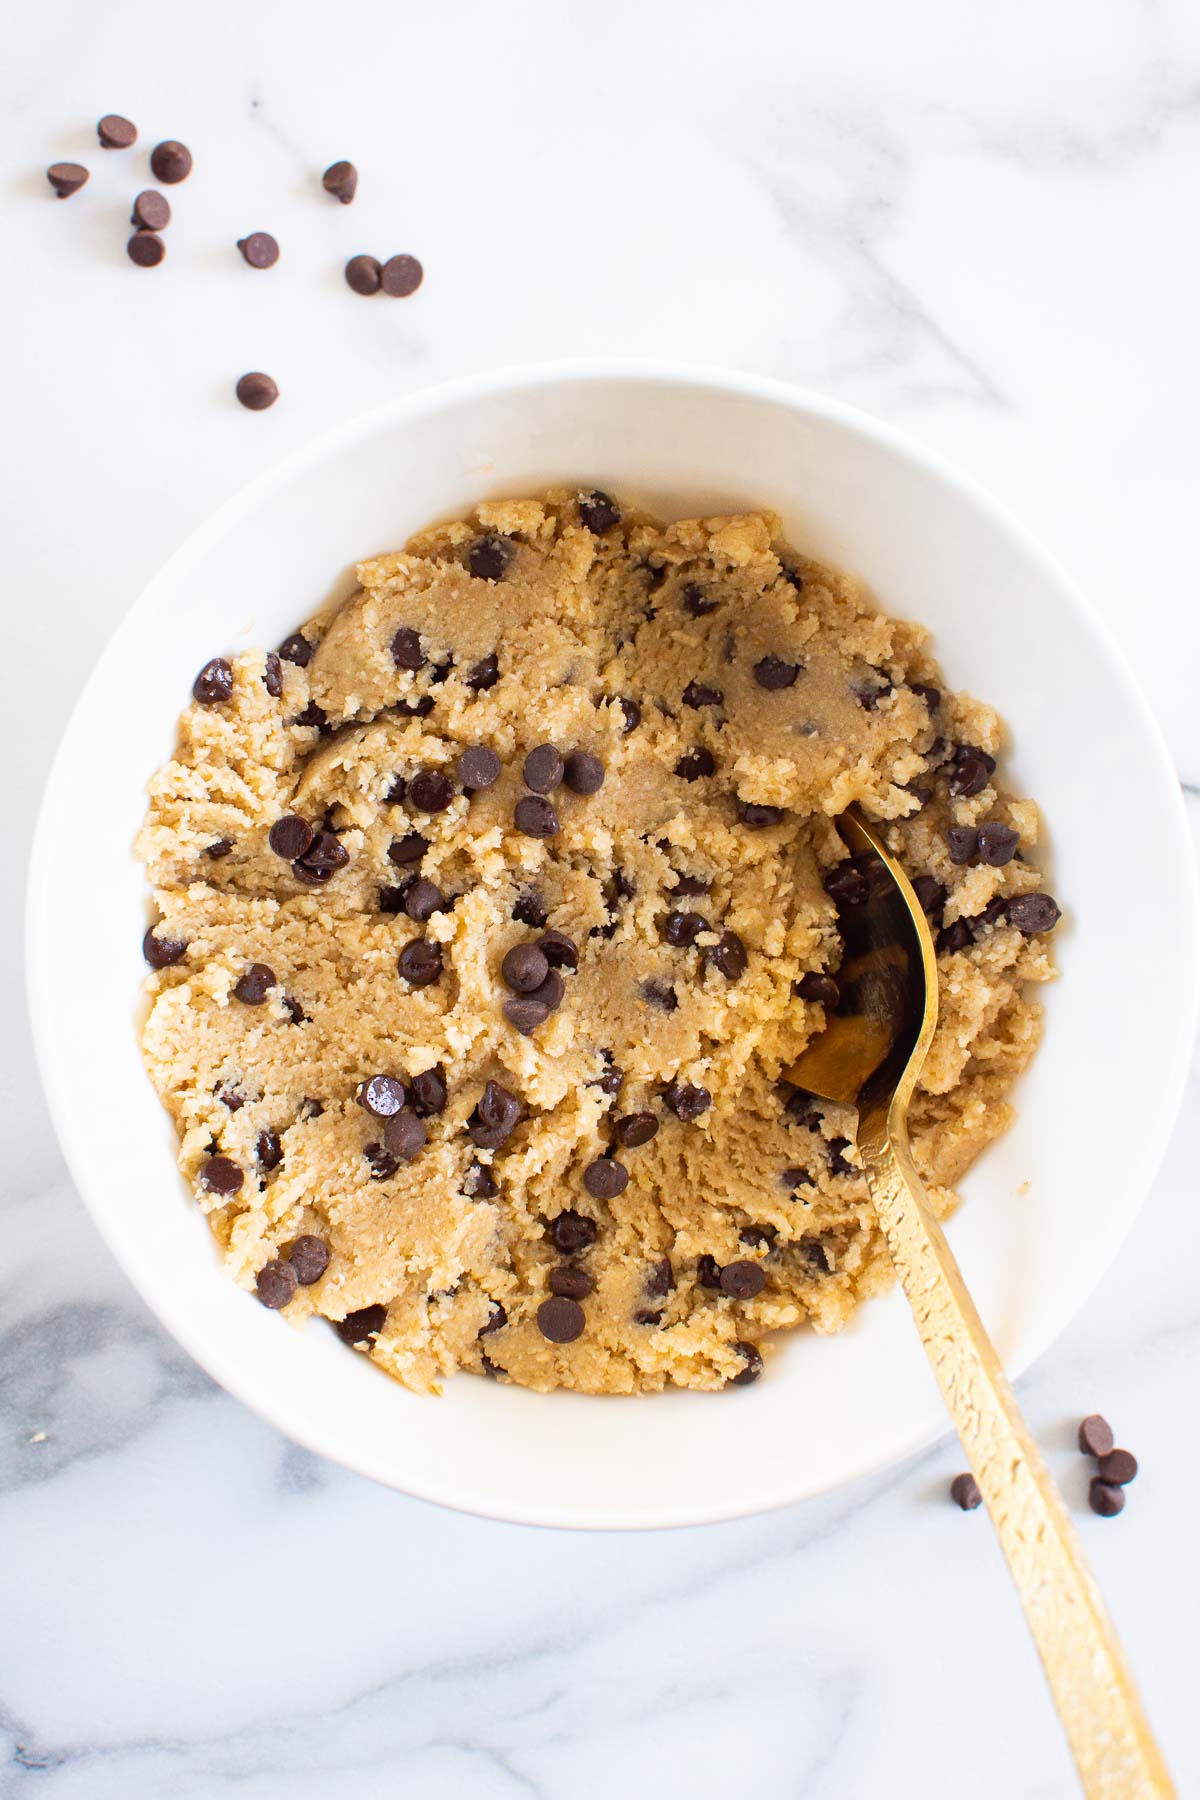 Healthy Cookie Dough" />
	
	
	
	
	
	
	
	
	
	
	
	
	
	{"@context":"https://schema.org","@graph":[{"@type":"Organization","@id":"https://ifoodreal.com/#organization","name":"iFoodreal","url":"https://ifoodreal.com/","sameAs":["https://www.facebook.com/iFOODreal/","https://www.instagram.com/ifoodreal/","https://www.pinterest.com/ifoodreal/","https://twitter.com/ifoodreal"],"logo":{"@type":"ImageObject","@id":"https://ifoodreal.com/#logo","inLanguage":"en-US","url":"https://ifoodreal.com/wp-content/uploads/2017/11/ifrLogo-1.png","contentUrl":"https://ifoodreal.com/wp-content/uploads/2017/11/ifrLogo-1.png","width":150,"height":37,"caption":"iFoodreal"},"image":{"@id":"https://ifoodreal.com/#logo"}},{"@type":"WebSite","@id":"https://ifoodreal.com/#website","url":"https://ifoodreal.com/","name":"iFOODreal.com","description":"","publisher":{"@id":"https://ifoodreal.com/#organization"},"potentialAction":[{"@type":"SearchAction","target":{"@type":"EntryPoint","urlTemplate":"https://ifoodreal.com/?s={search_term_string}"},"query-input":"required name=search_term_string"}],"inLanguage":"en-US"},{"@type":"ImageObject","@id":"https://ifoodreal.com/healthy-cookie-dough/#primaryimage","inLanguage":"en-US","url":"https://ifoodreal.com/wp-content/uploads/2021/12/fg-healthy-cookie-dough-recipe.jpg","contentUrl":"https://ifoodreal.com/wp-content/uploads/2021/12/fg-healthy-cookie-dough-recipe.jpg","width":1250,"height":1250,"caption":"edible healthy cookie dough with chocolate chips"},{"@type":["WebPage","FAQPage"],"@id":"https://ifoodreal.com/healthy-cookie-dough/#webpage","url":"https://ifoodreal.com/healthy-cookie-dough/","name":"Healthy Cookie Dough {with Almond Flour}